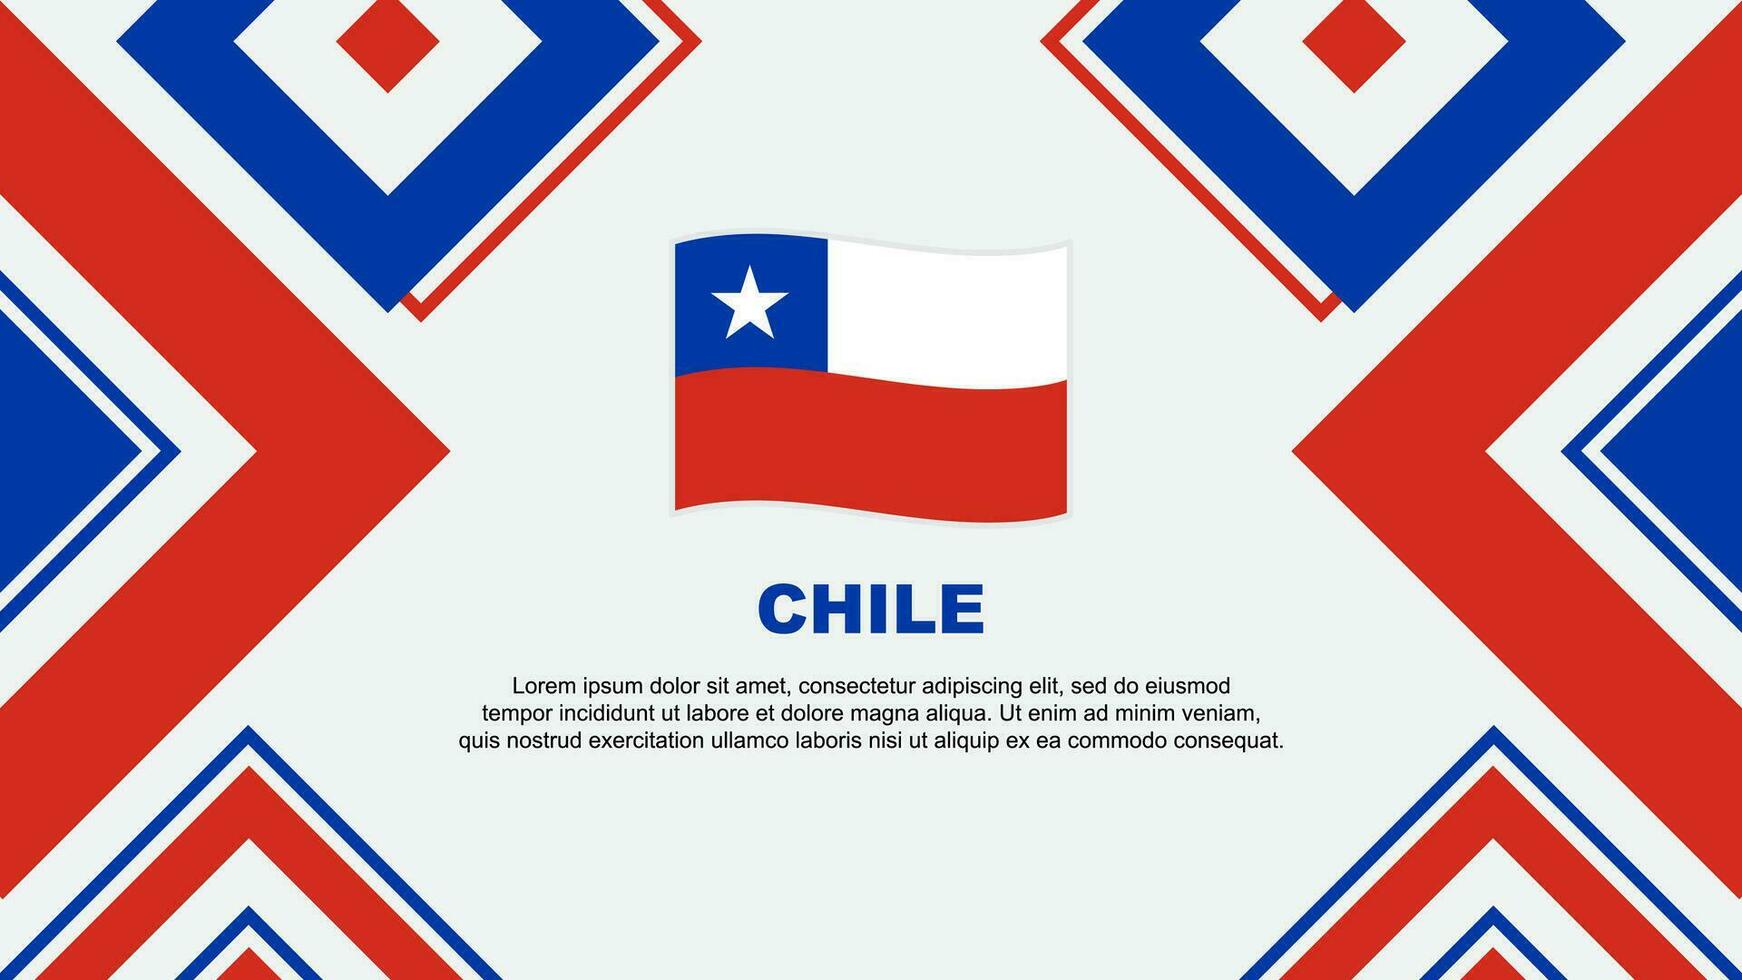 Chile Flag Abstract Background Design Template. Chile Independence Day Banner Wallpaper Vector Illustration. Chile Independence Day